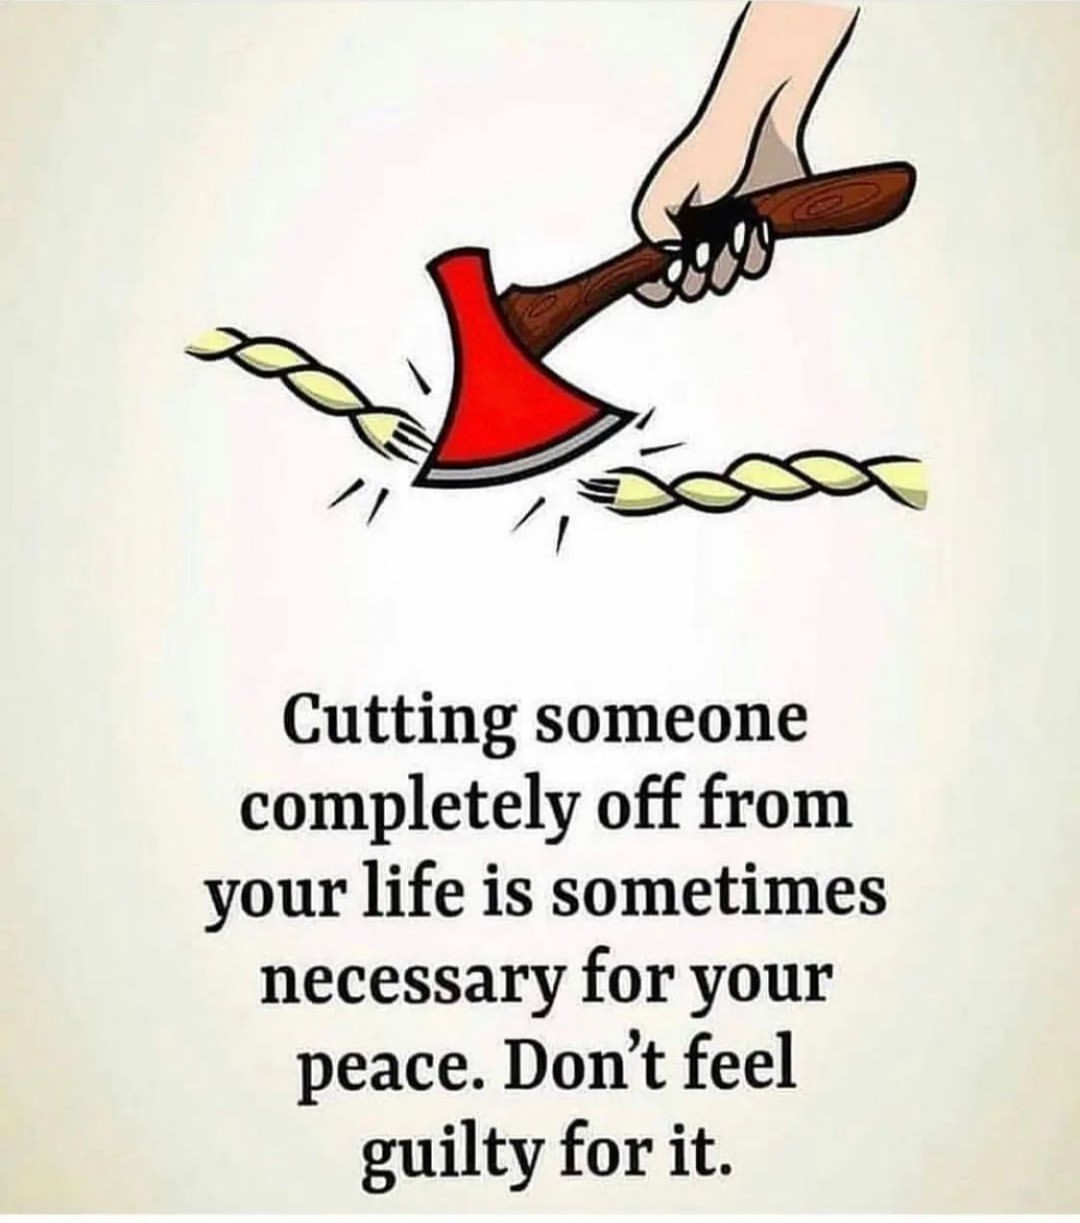 Cutting someone completely off from your life is sometimes necessary for your peace. Don't feel guilty for it.